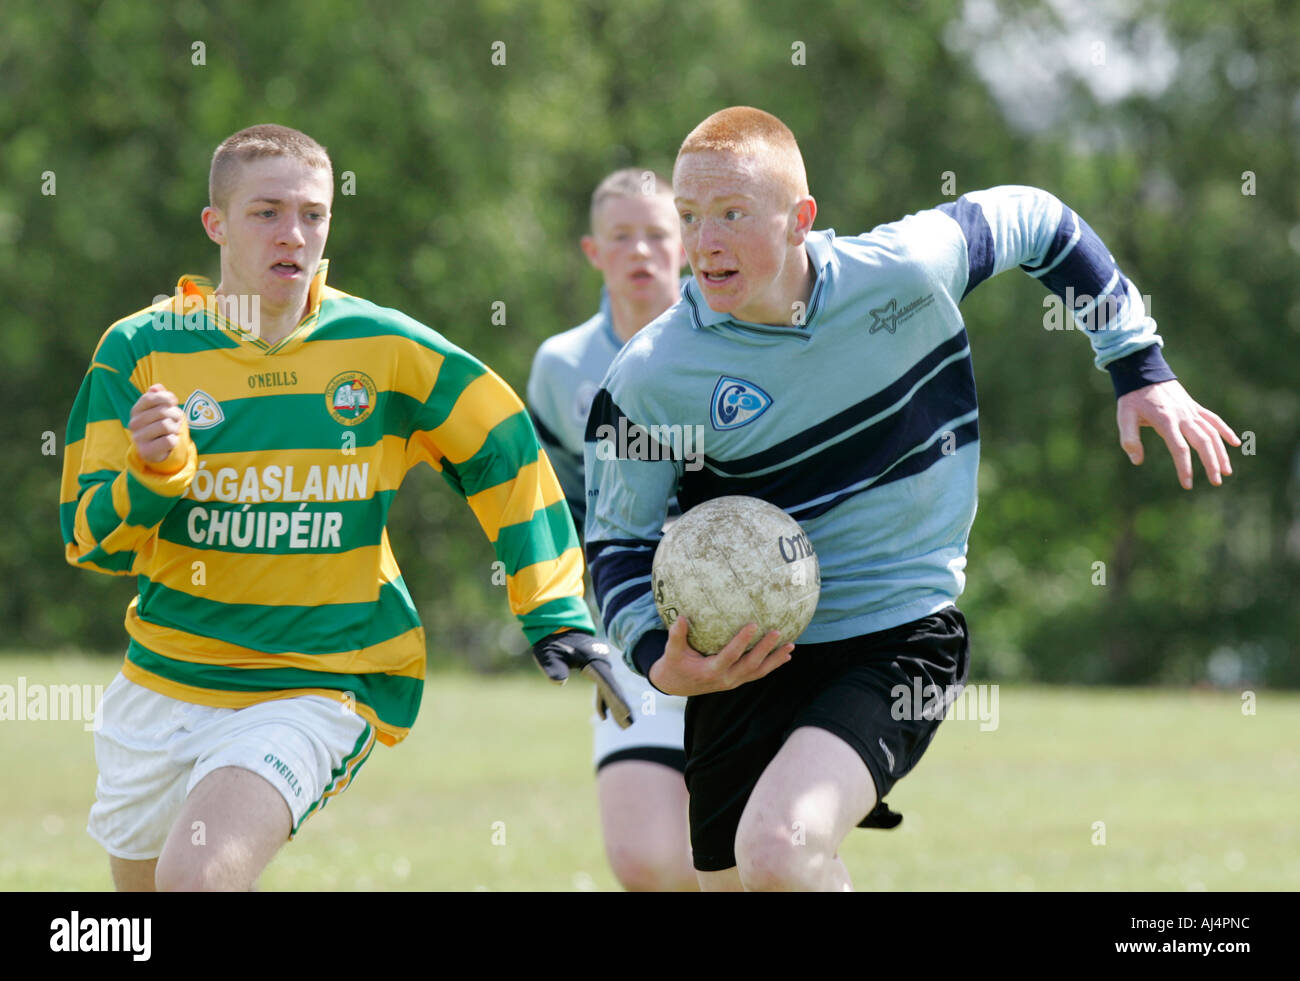 action from schoolboy gaelic football player running with the ball being persued belfast county antrim northern ireland Stock Photo